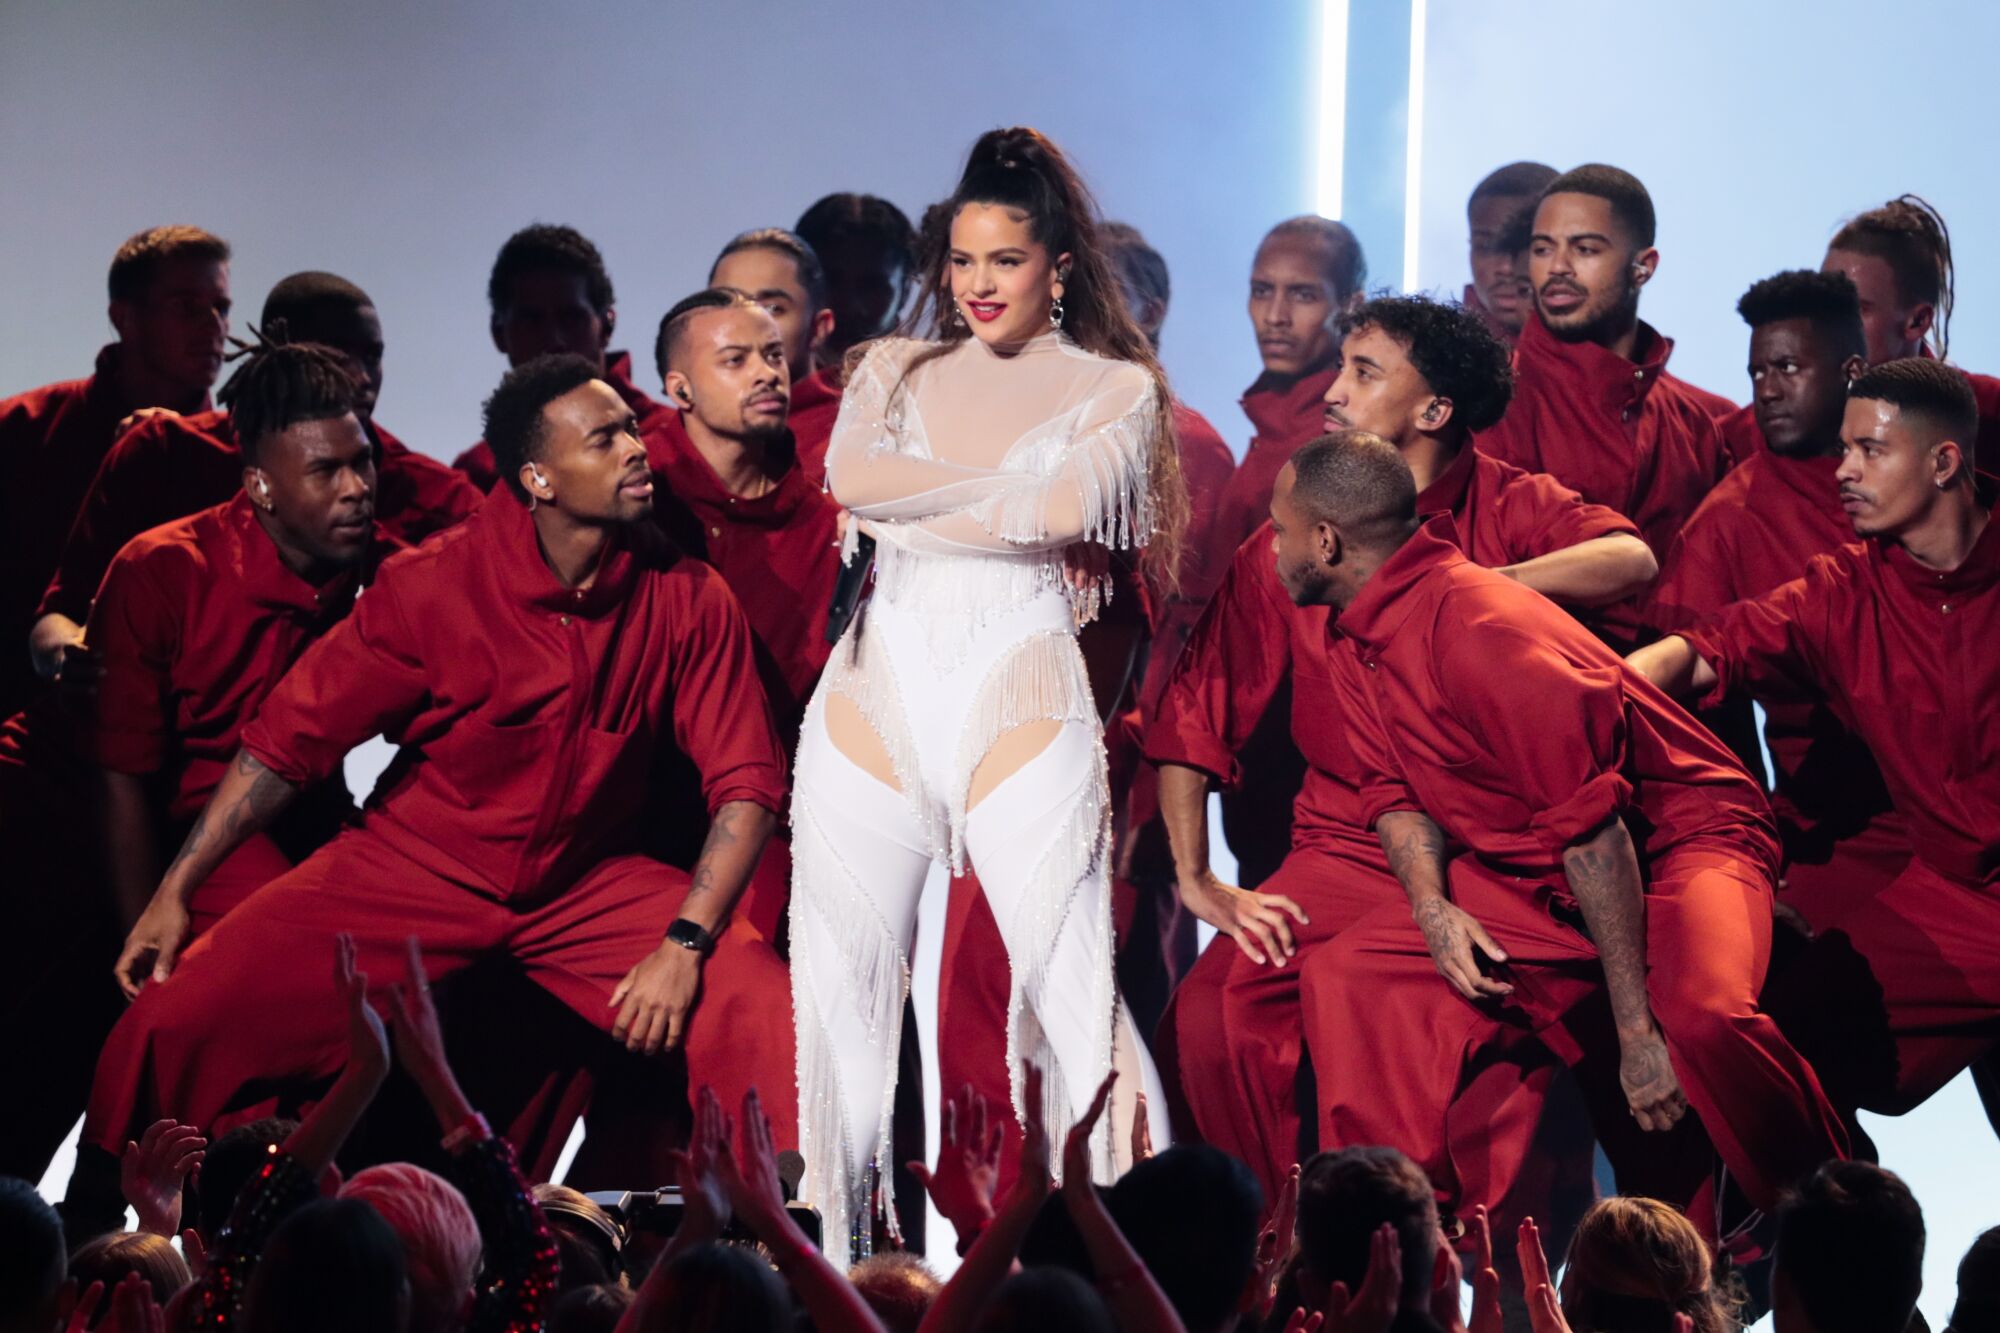 A woman in white performs onstage surrounded by men in red tracksuits.